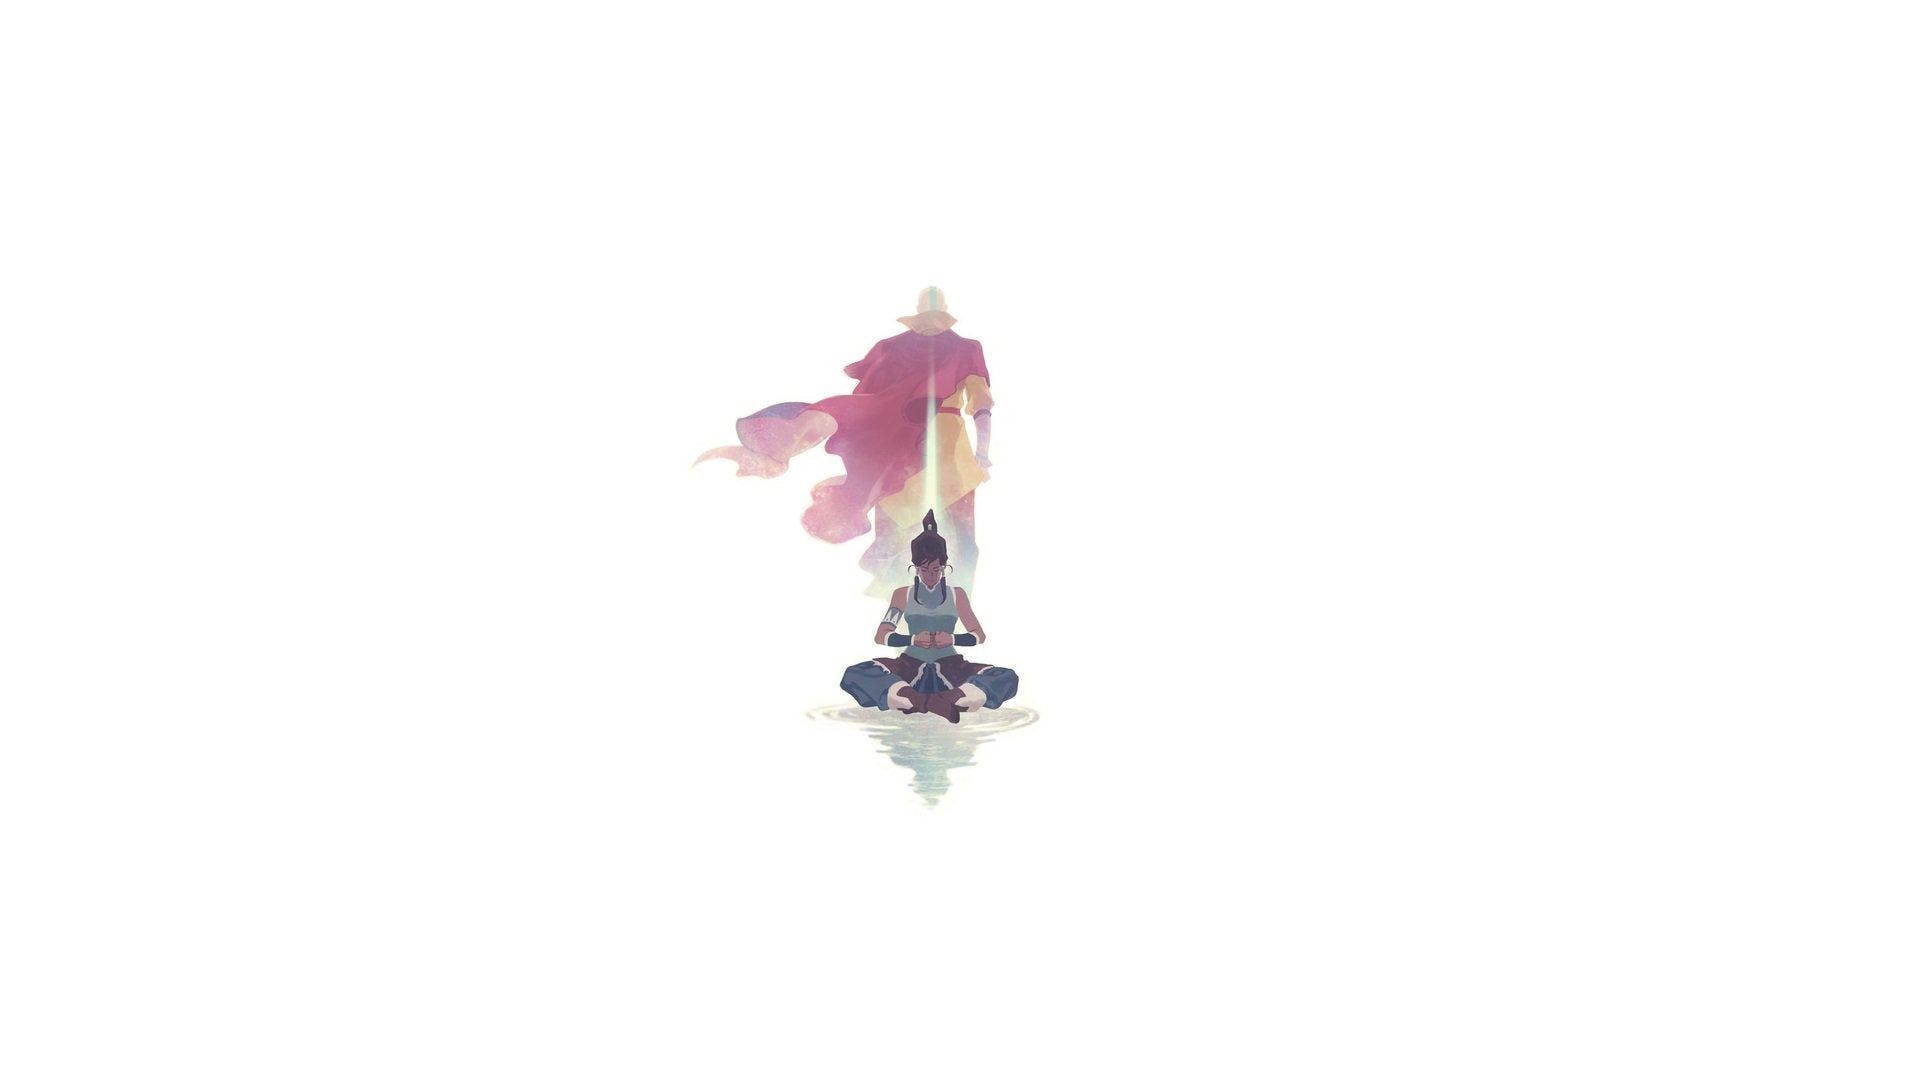 Saw The Korra Aang Meditation Photo And Thought It Would Make A